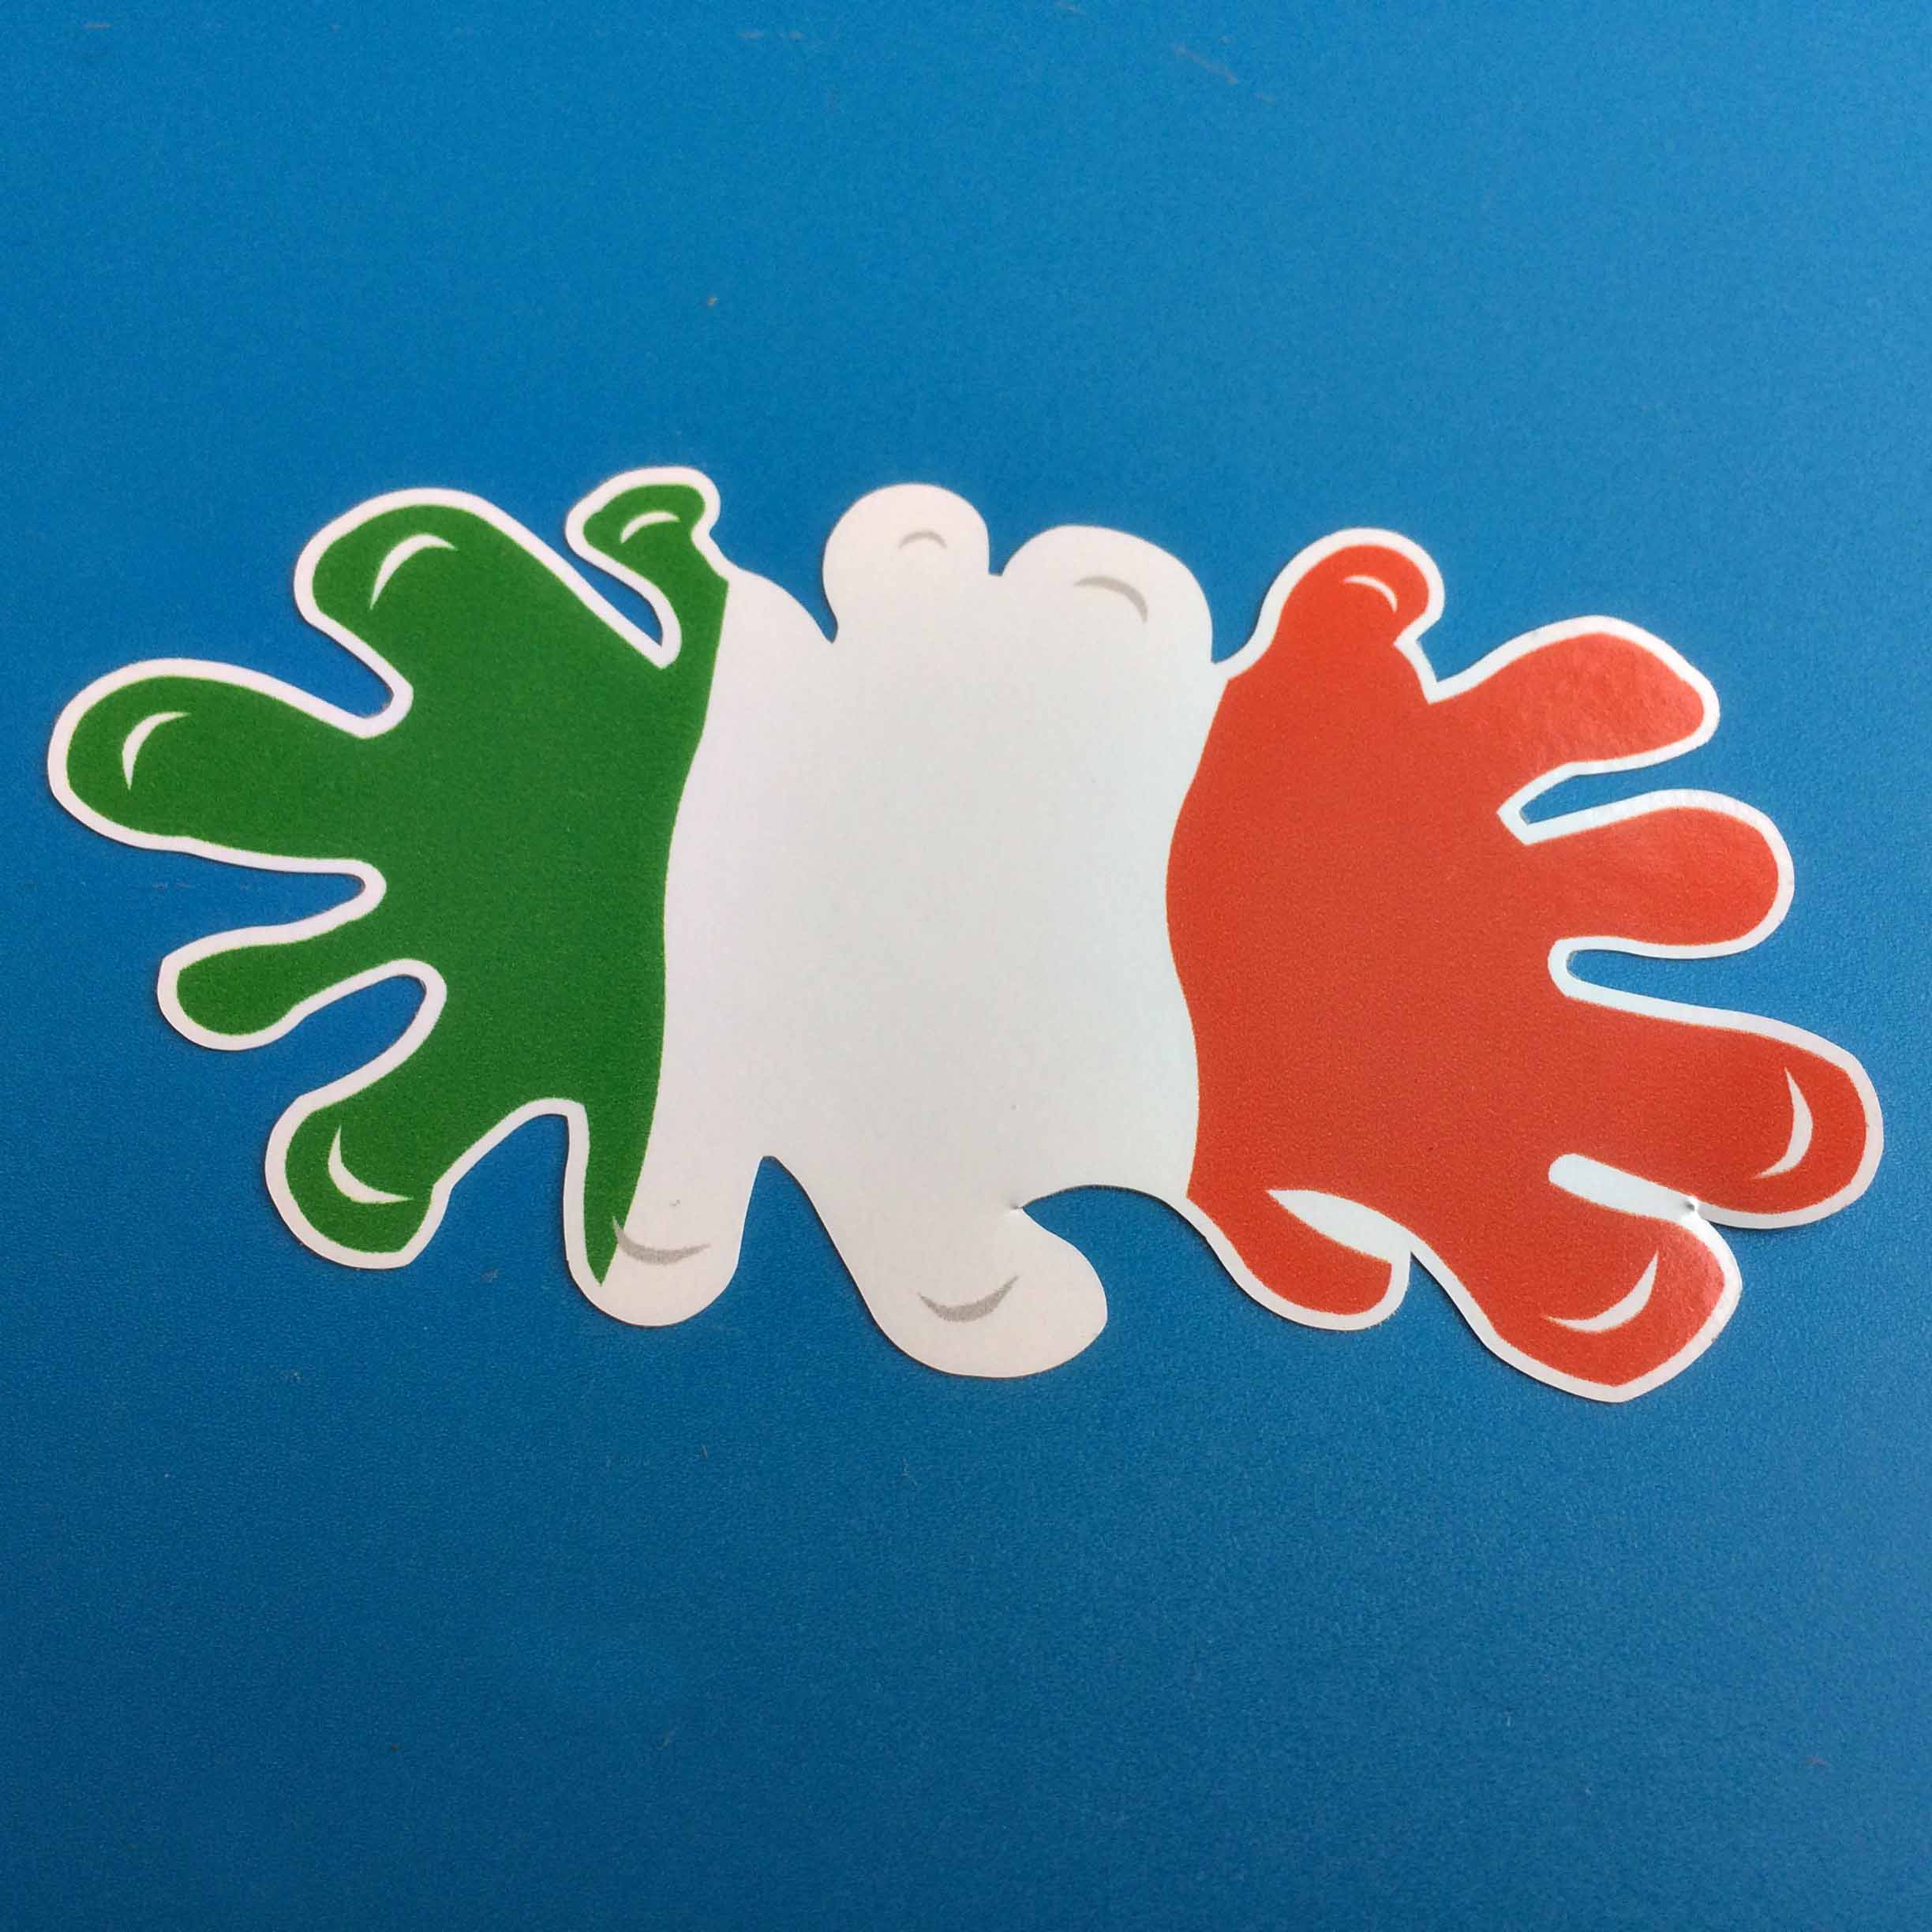 The green, white and red flag of Italy as a splatter of paint.